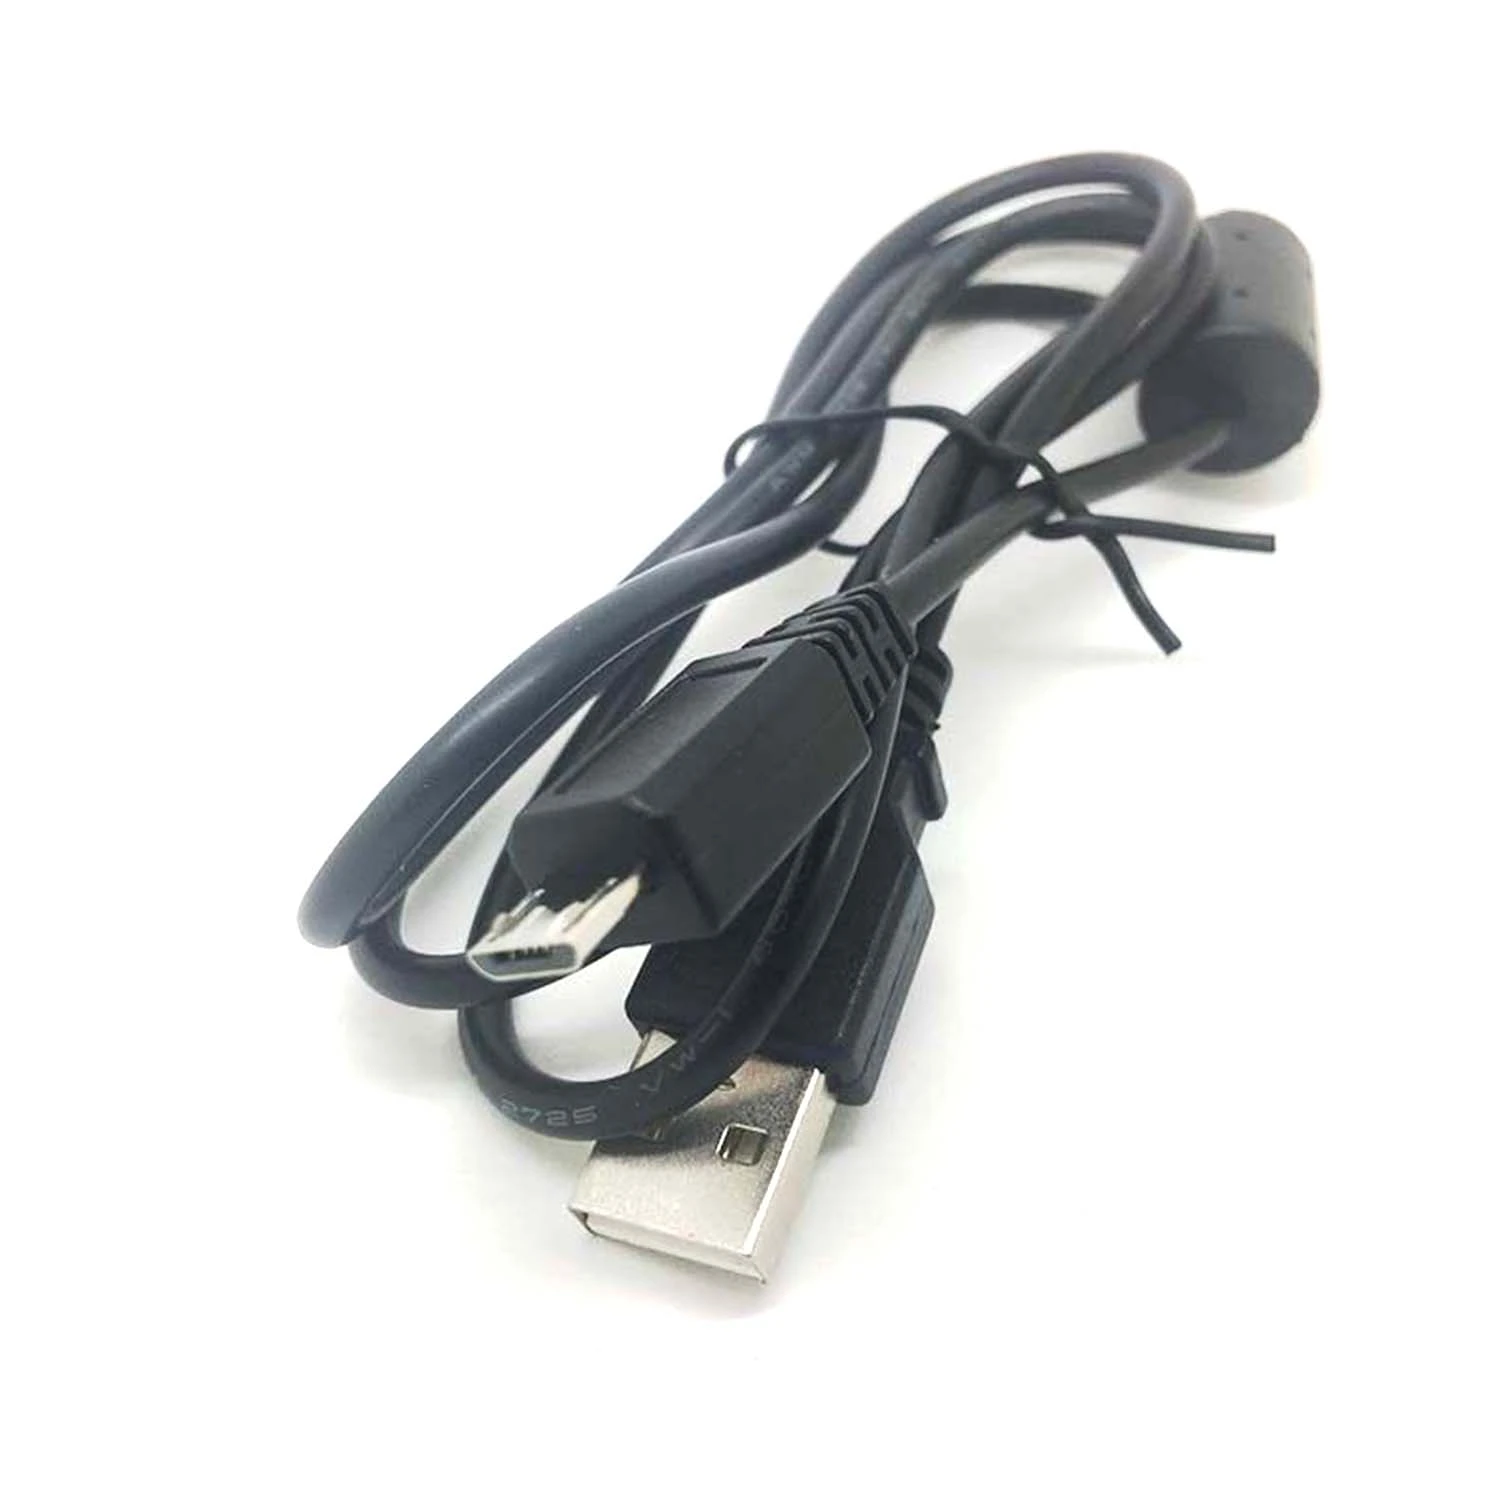 krater comfortabel vroegrijp Micro Usb sync cable For Nikon Coolpix S810c a900 S9900 S5300 D5600  P900|Data Cables| - AliExpress